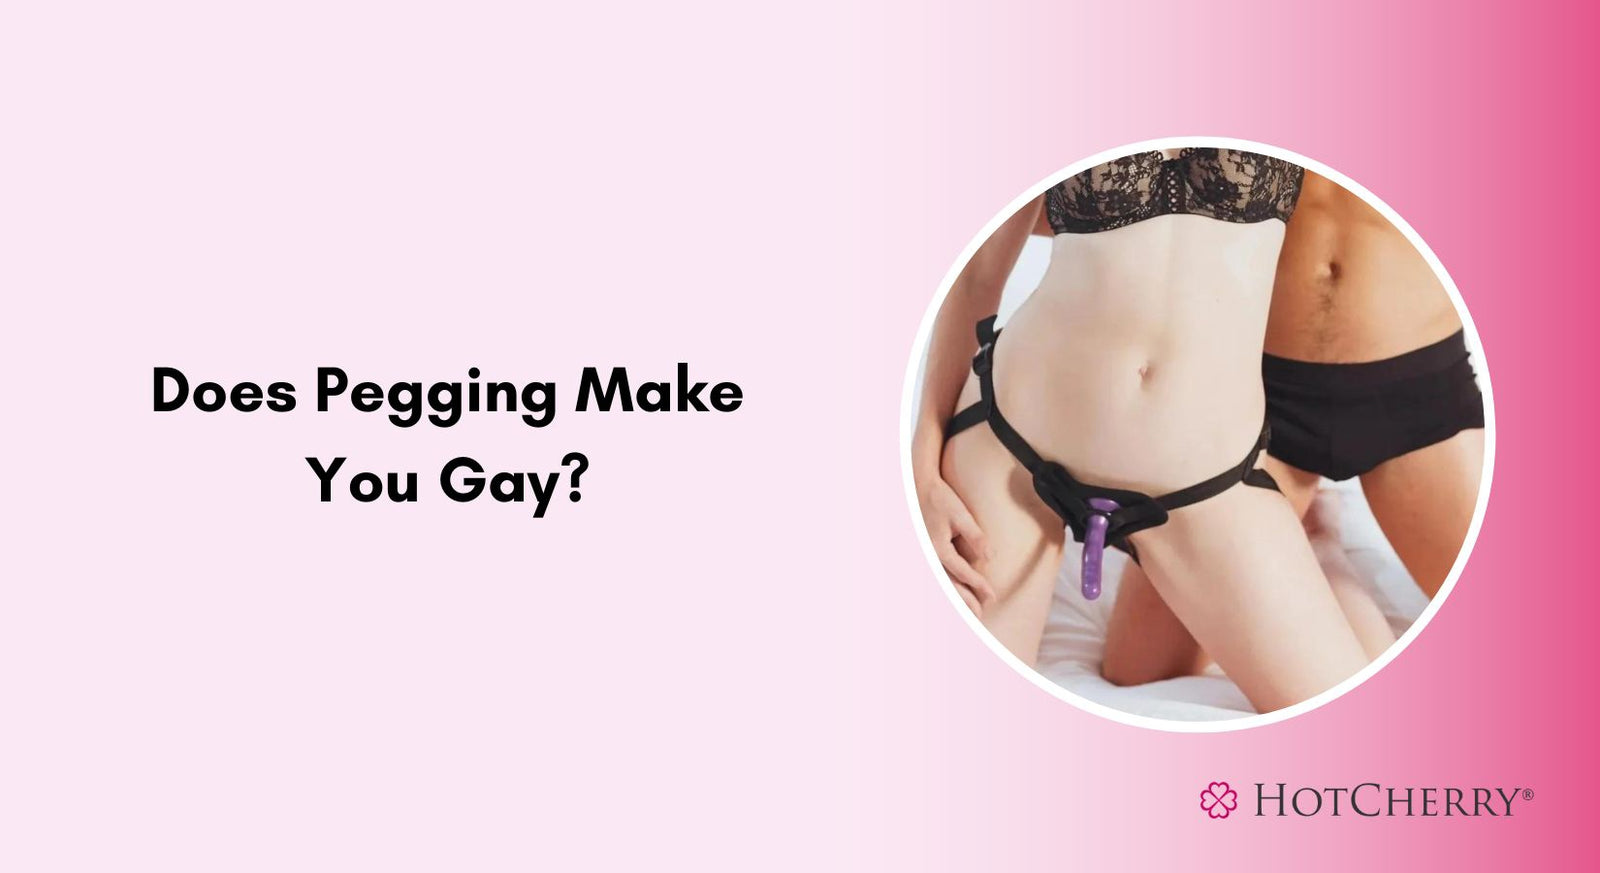 Does Pegging Make You Gay?